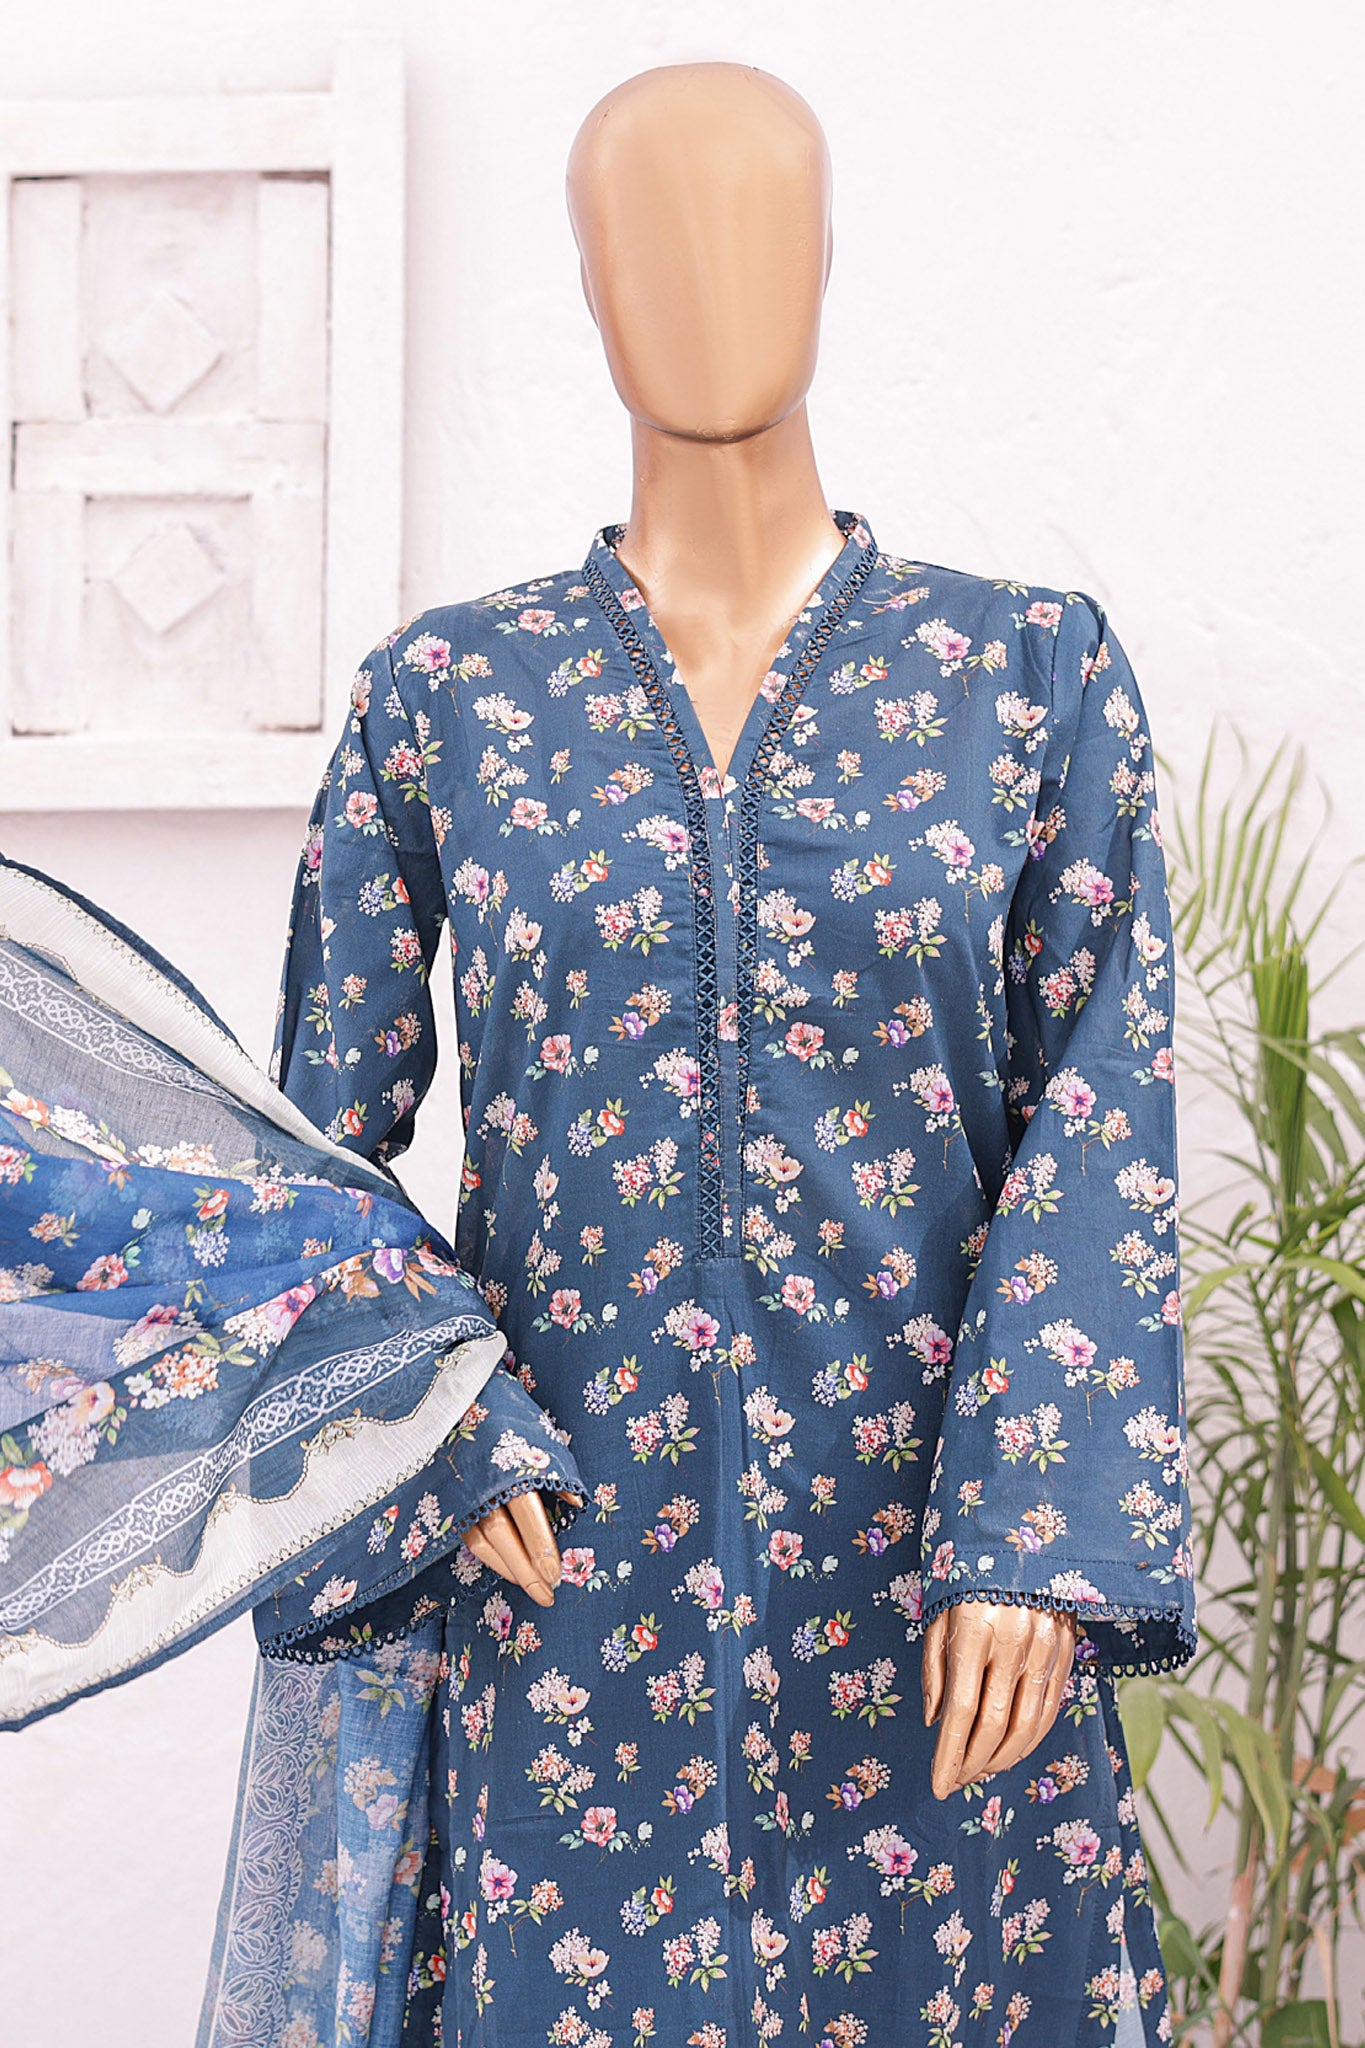 Bin Saeed Stitched 3 Piece Printed Lawn Vol-03 Collection'2024-SM-636-N Blue